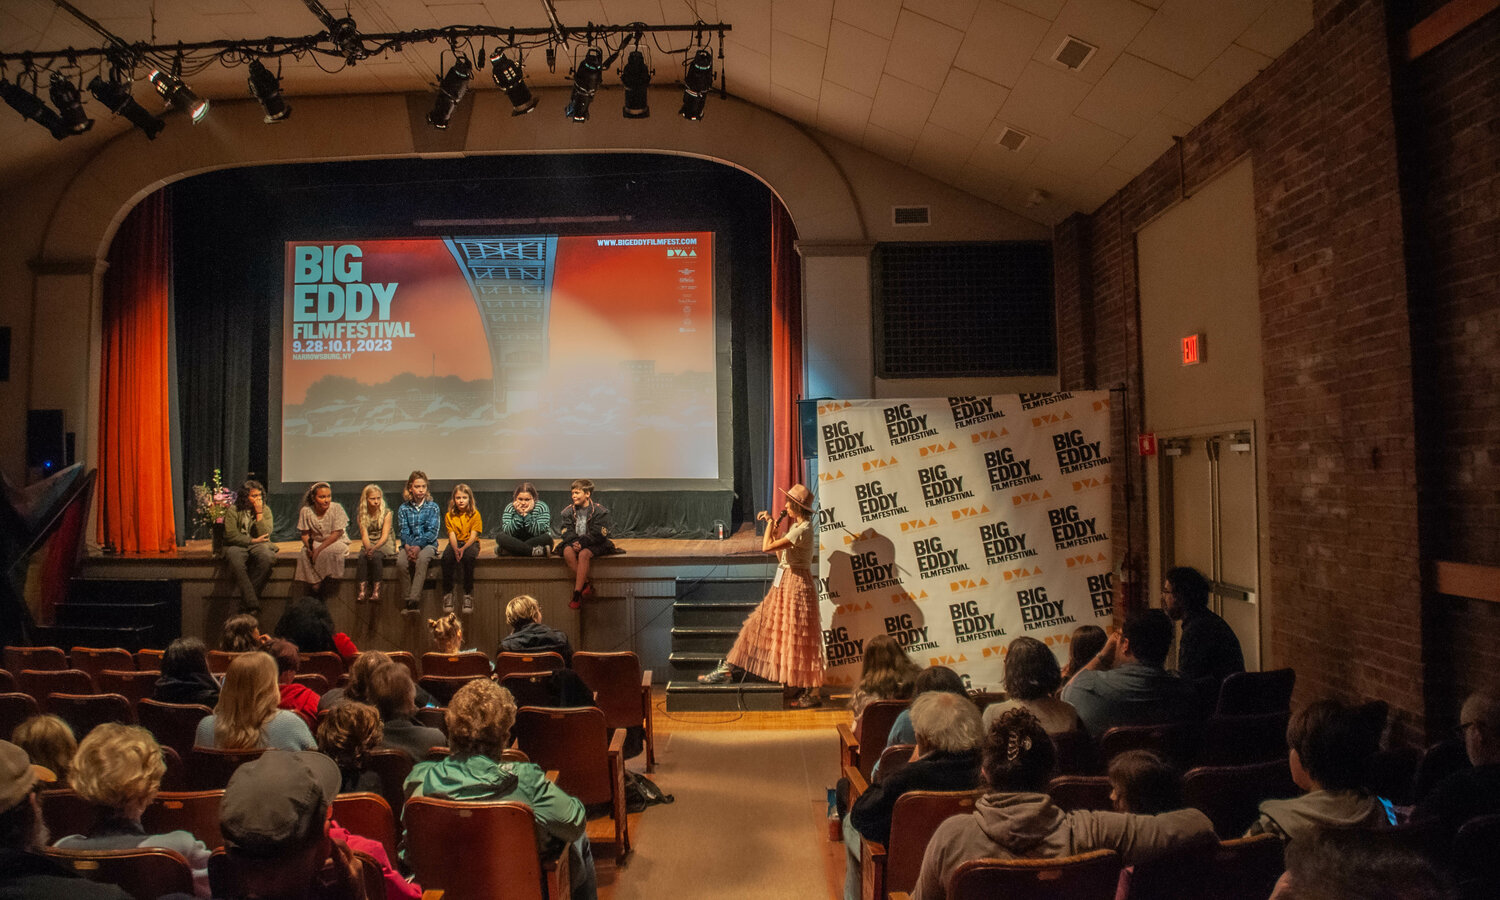 Q&A sessions followed several BEFF screenings, including the Kids Make Film series at the Tusten Theatre in Narrowsburg, NY last weekend.